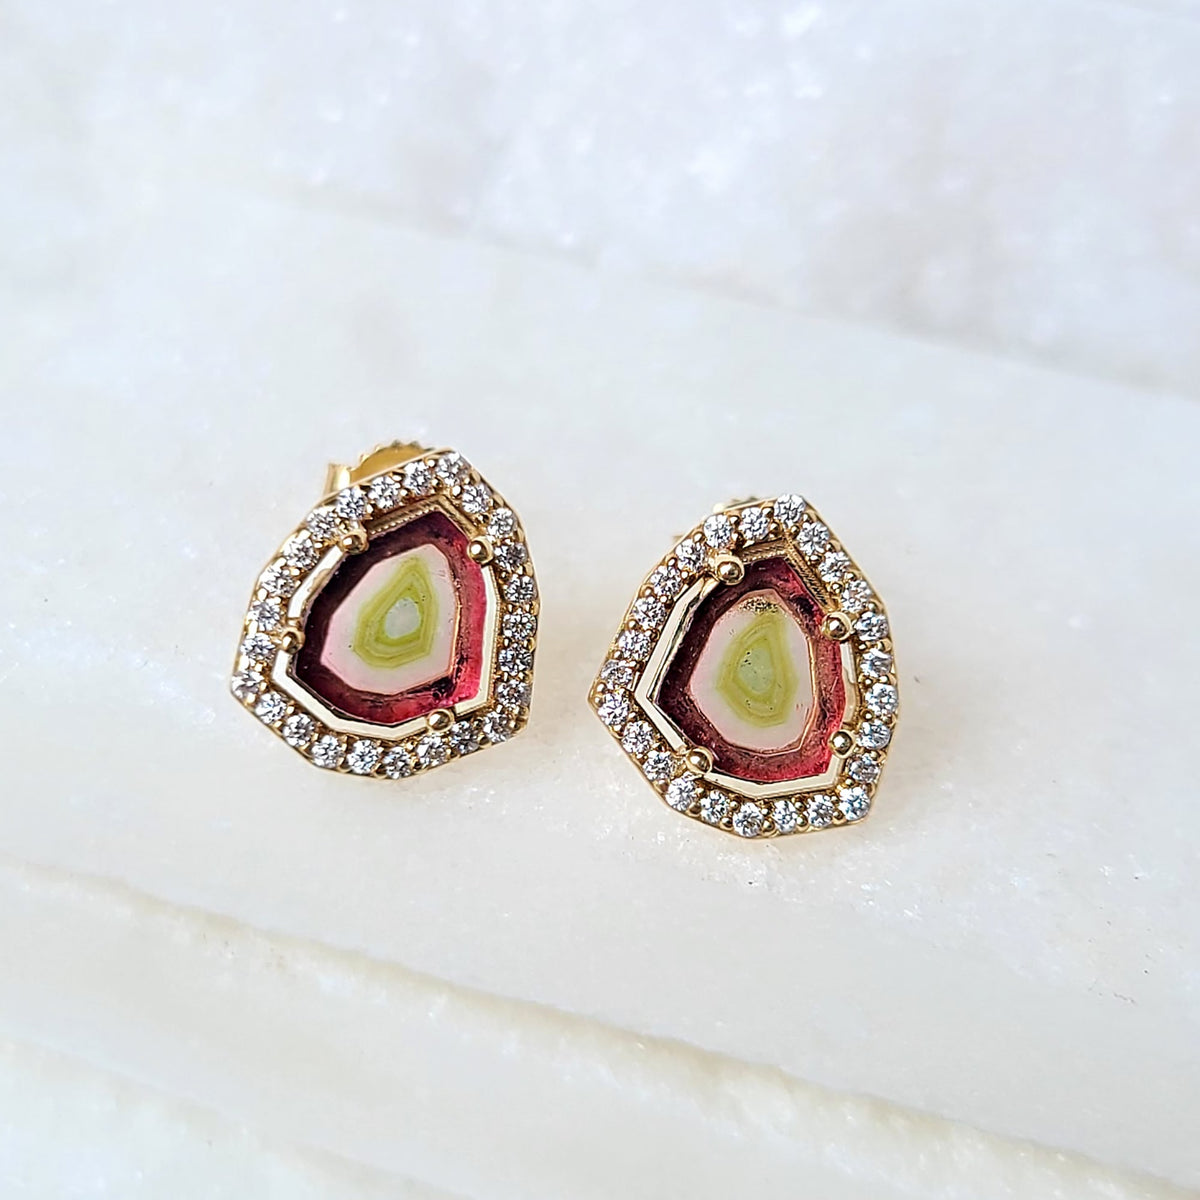 Sincerely Ginger Jewelry 14K Watermelon Tourmaline Diamond Earrings in Yellow Gold